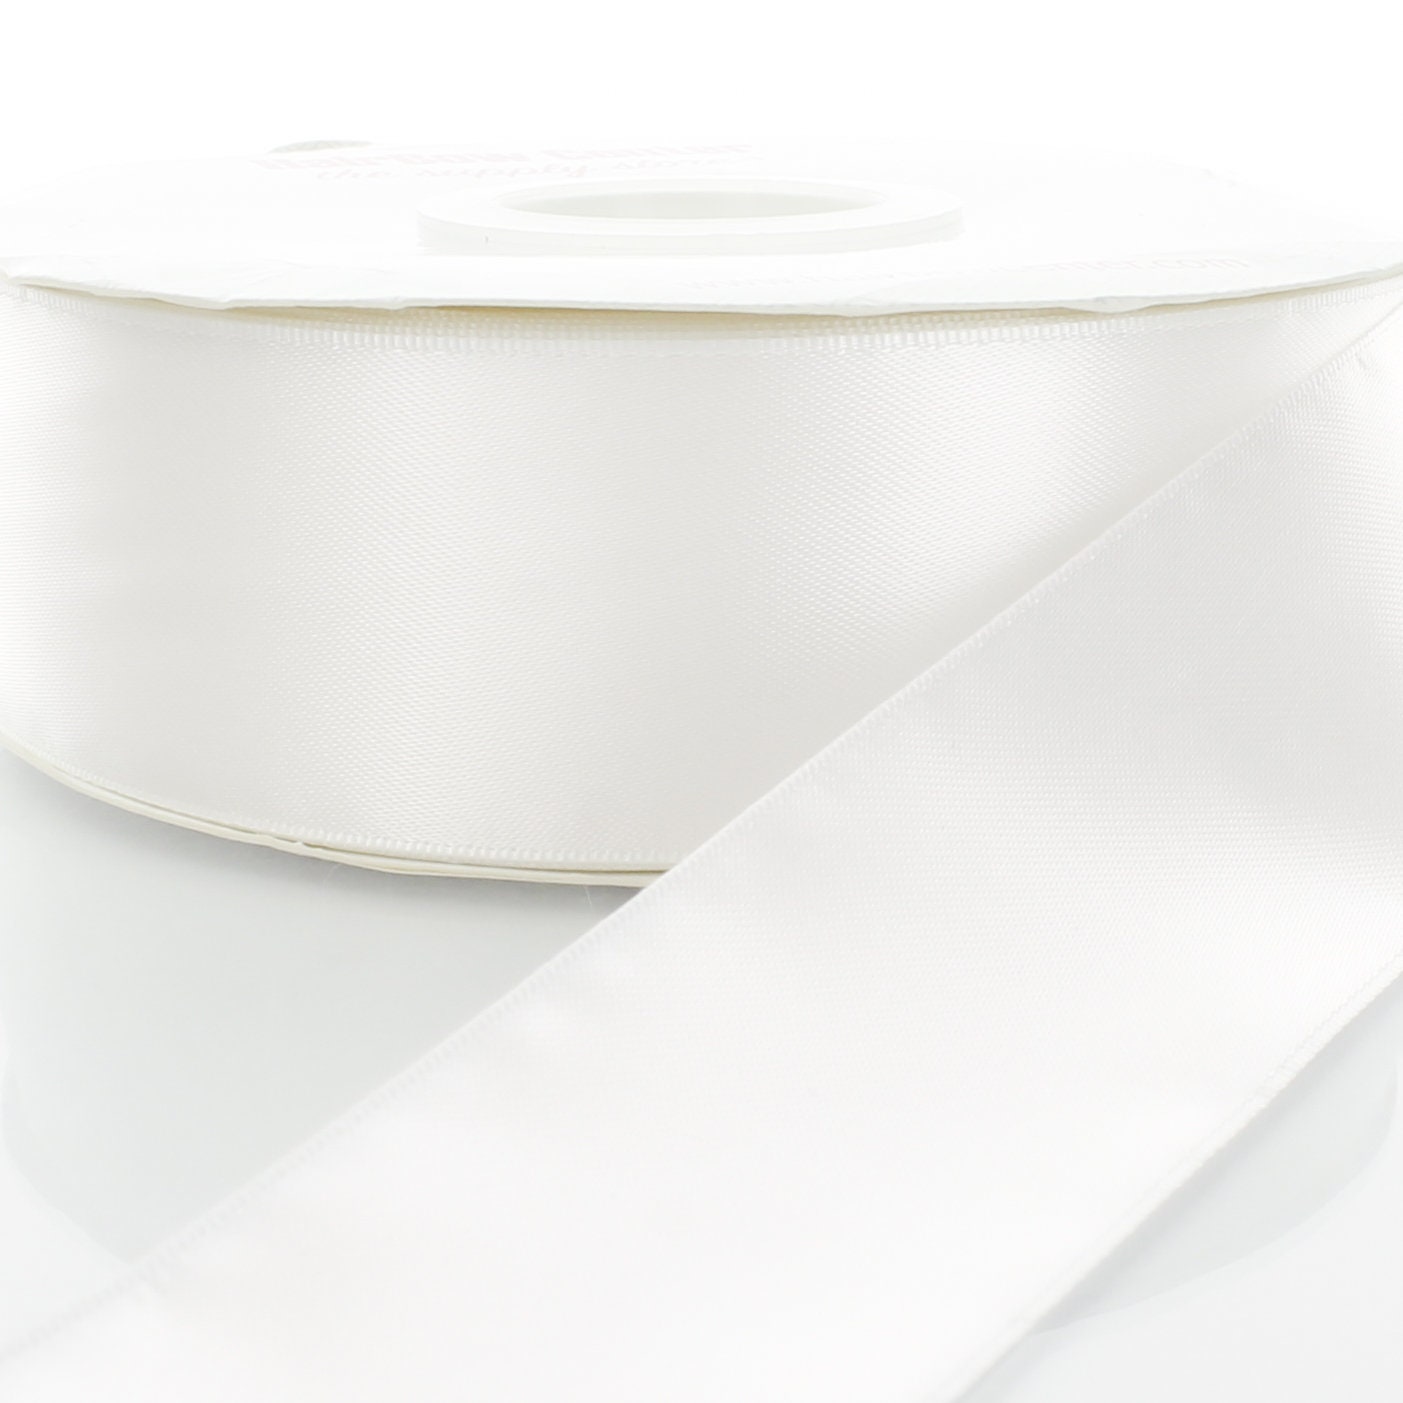  1-1/2 Wide x 50 Yards White Single Faced Polyester Satin  Ribbon, White Satin Ribbon Perfect for Wedding Decor, Wreath, Crafts, Gift  Wrapping & Other Projects (White)